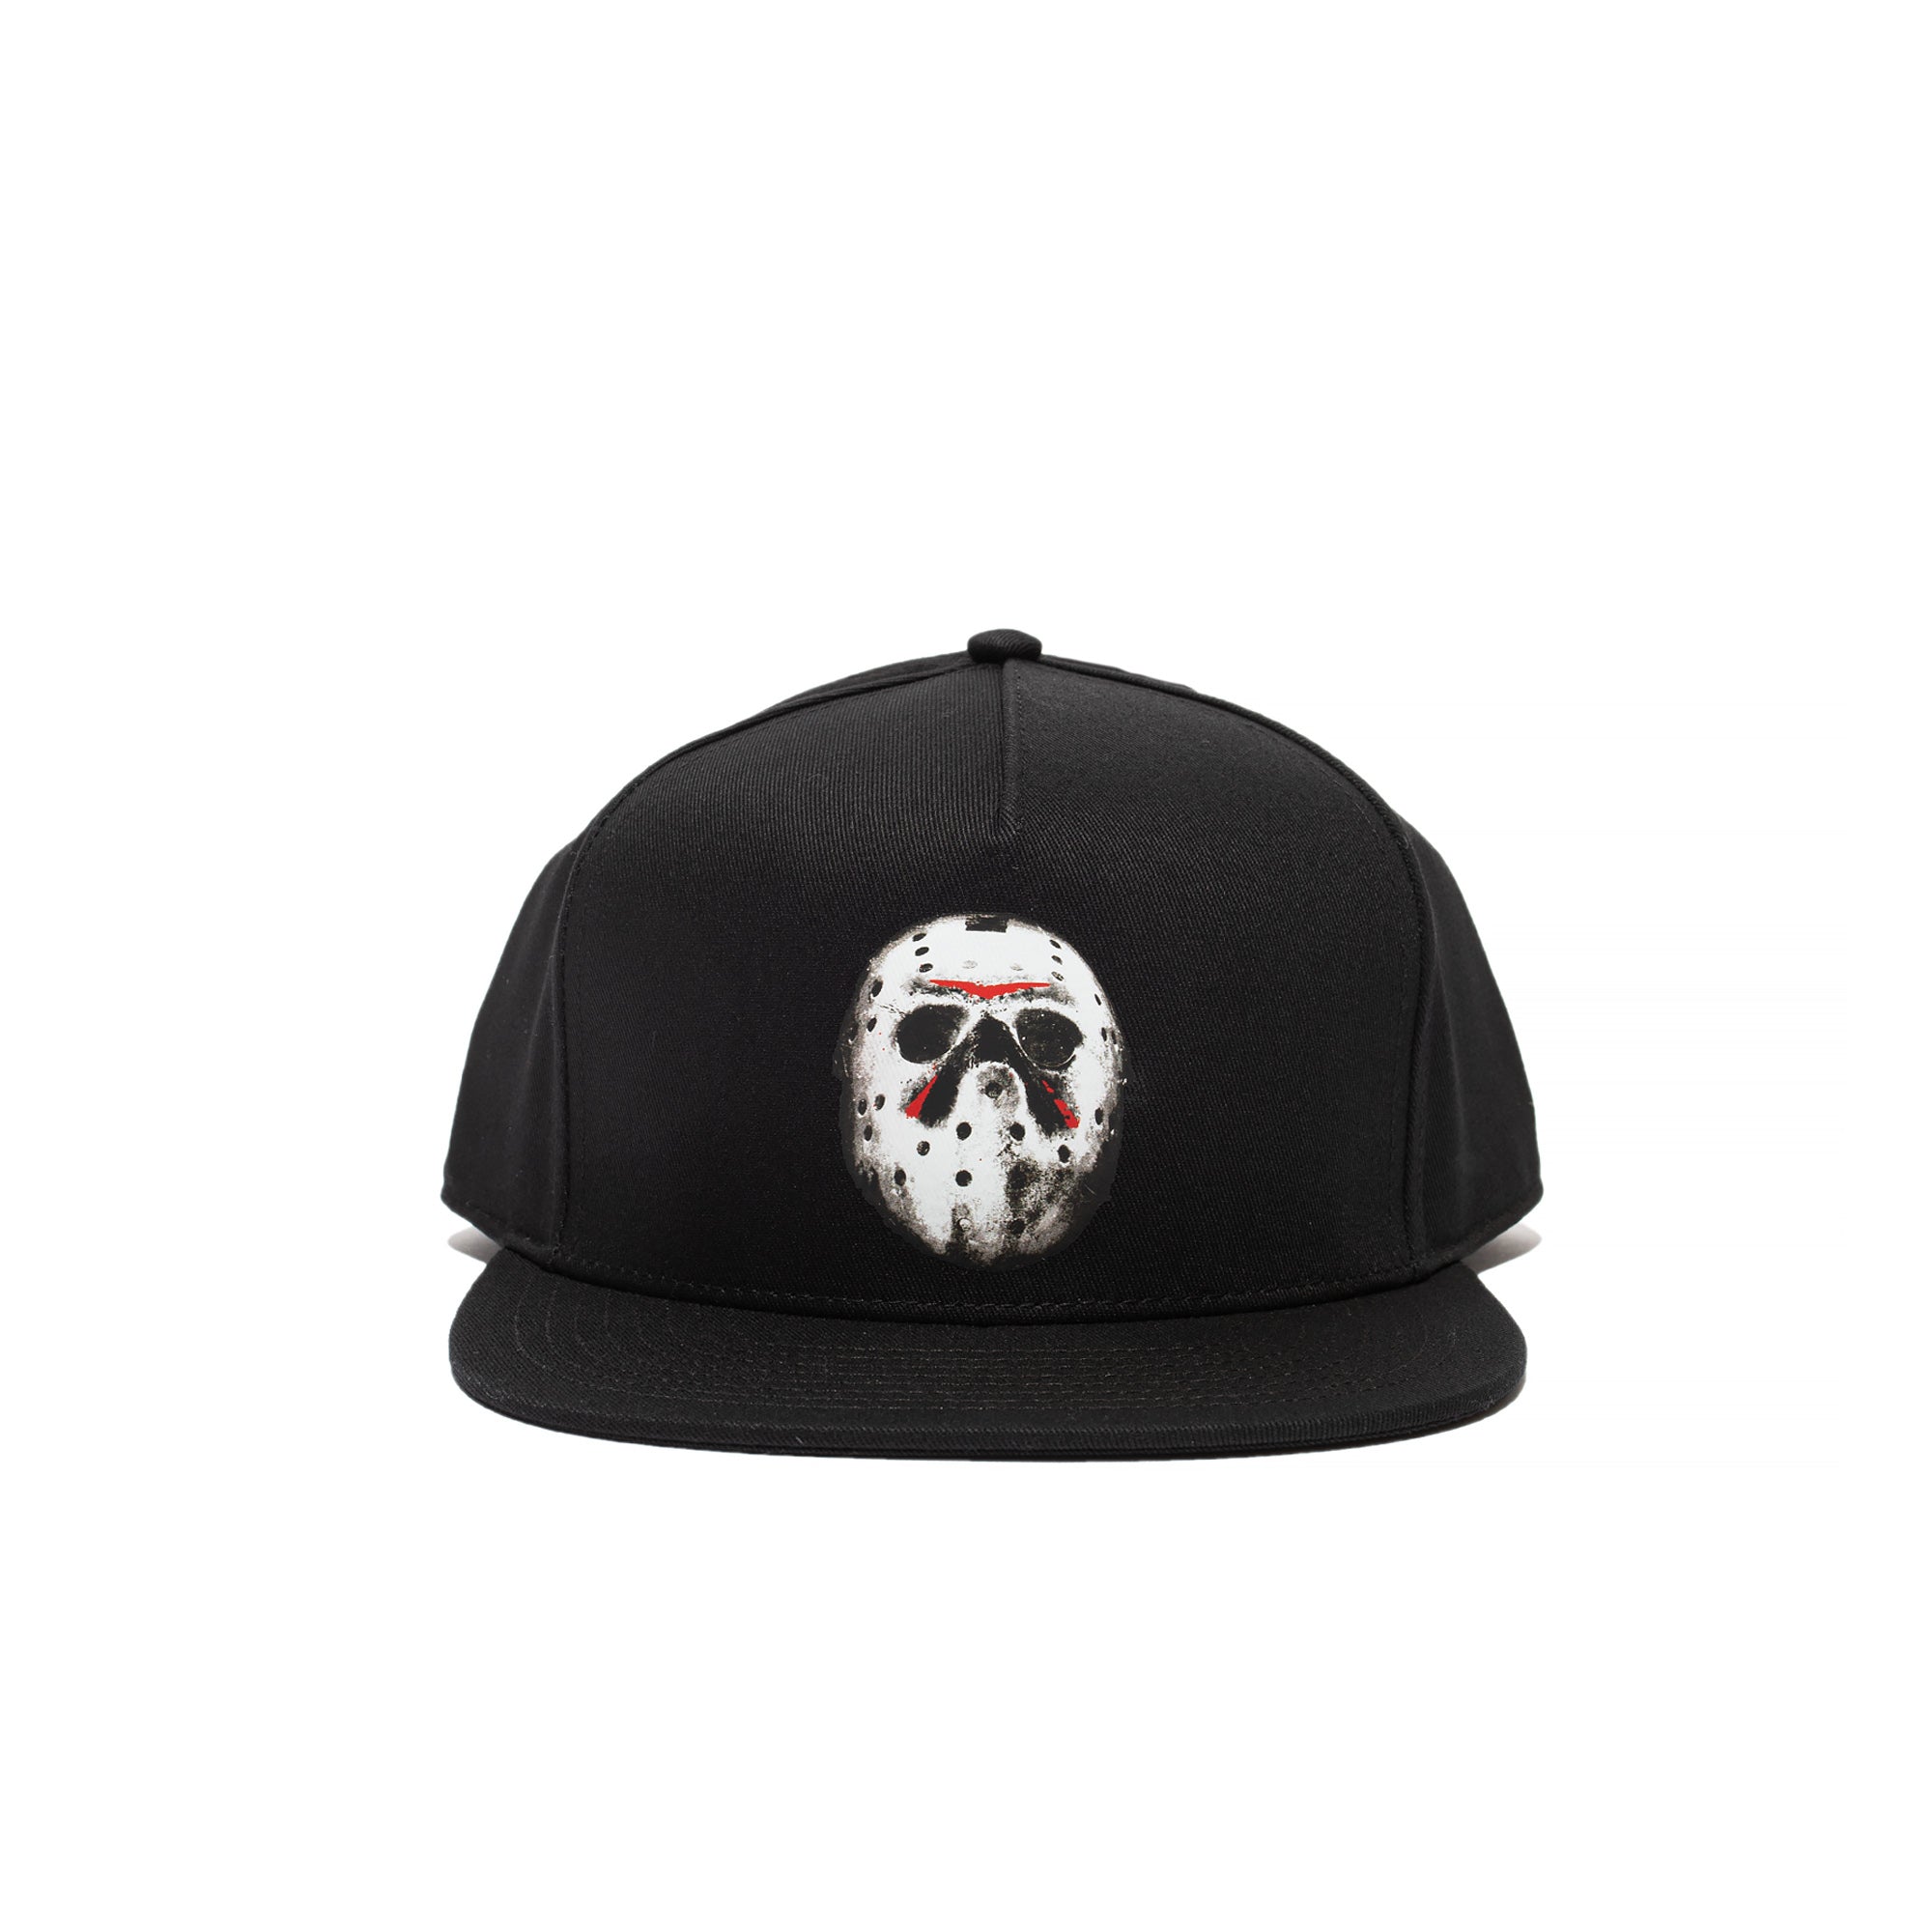 Vans x Friday The 13th Hat